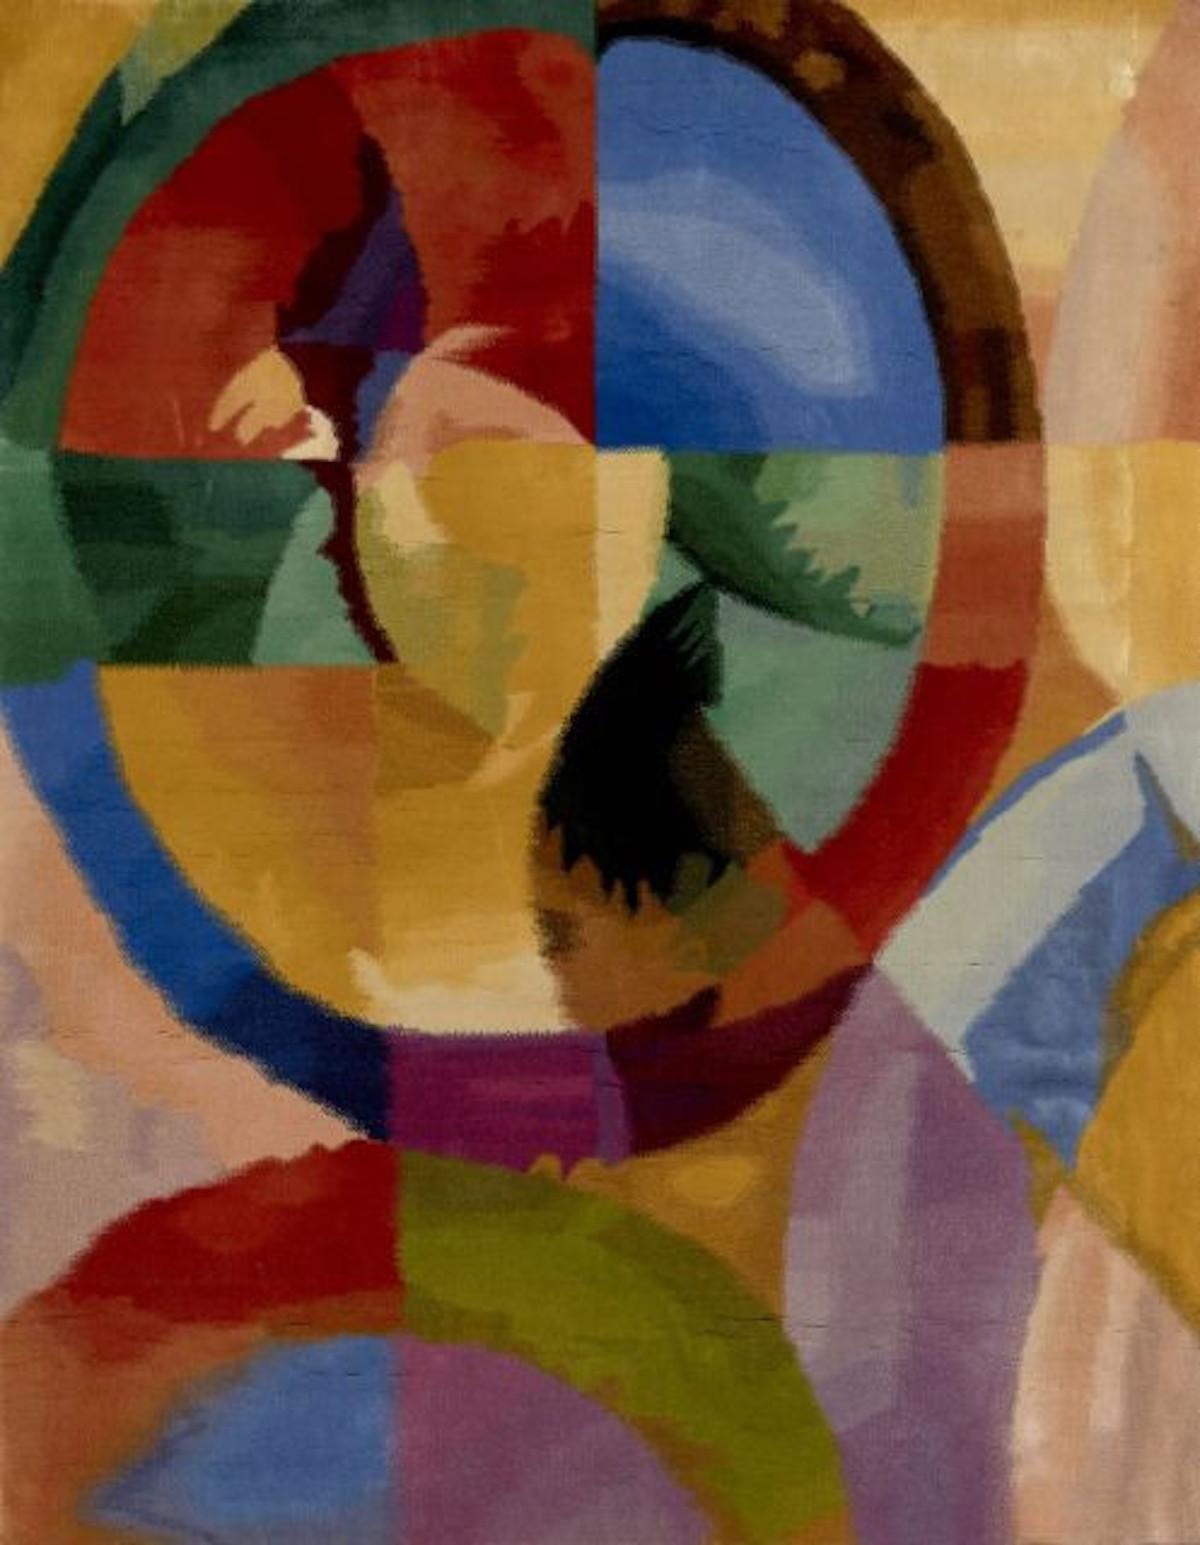 Soleil n.1. by Robert Delaunay, 1980 ca, Silk wool Tapestry woven on Canvas 2